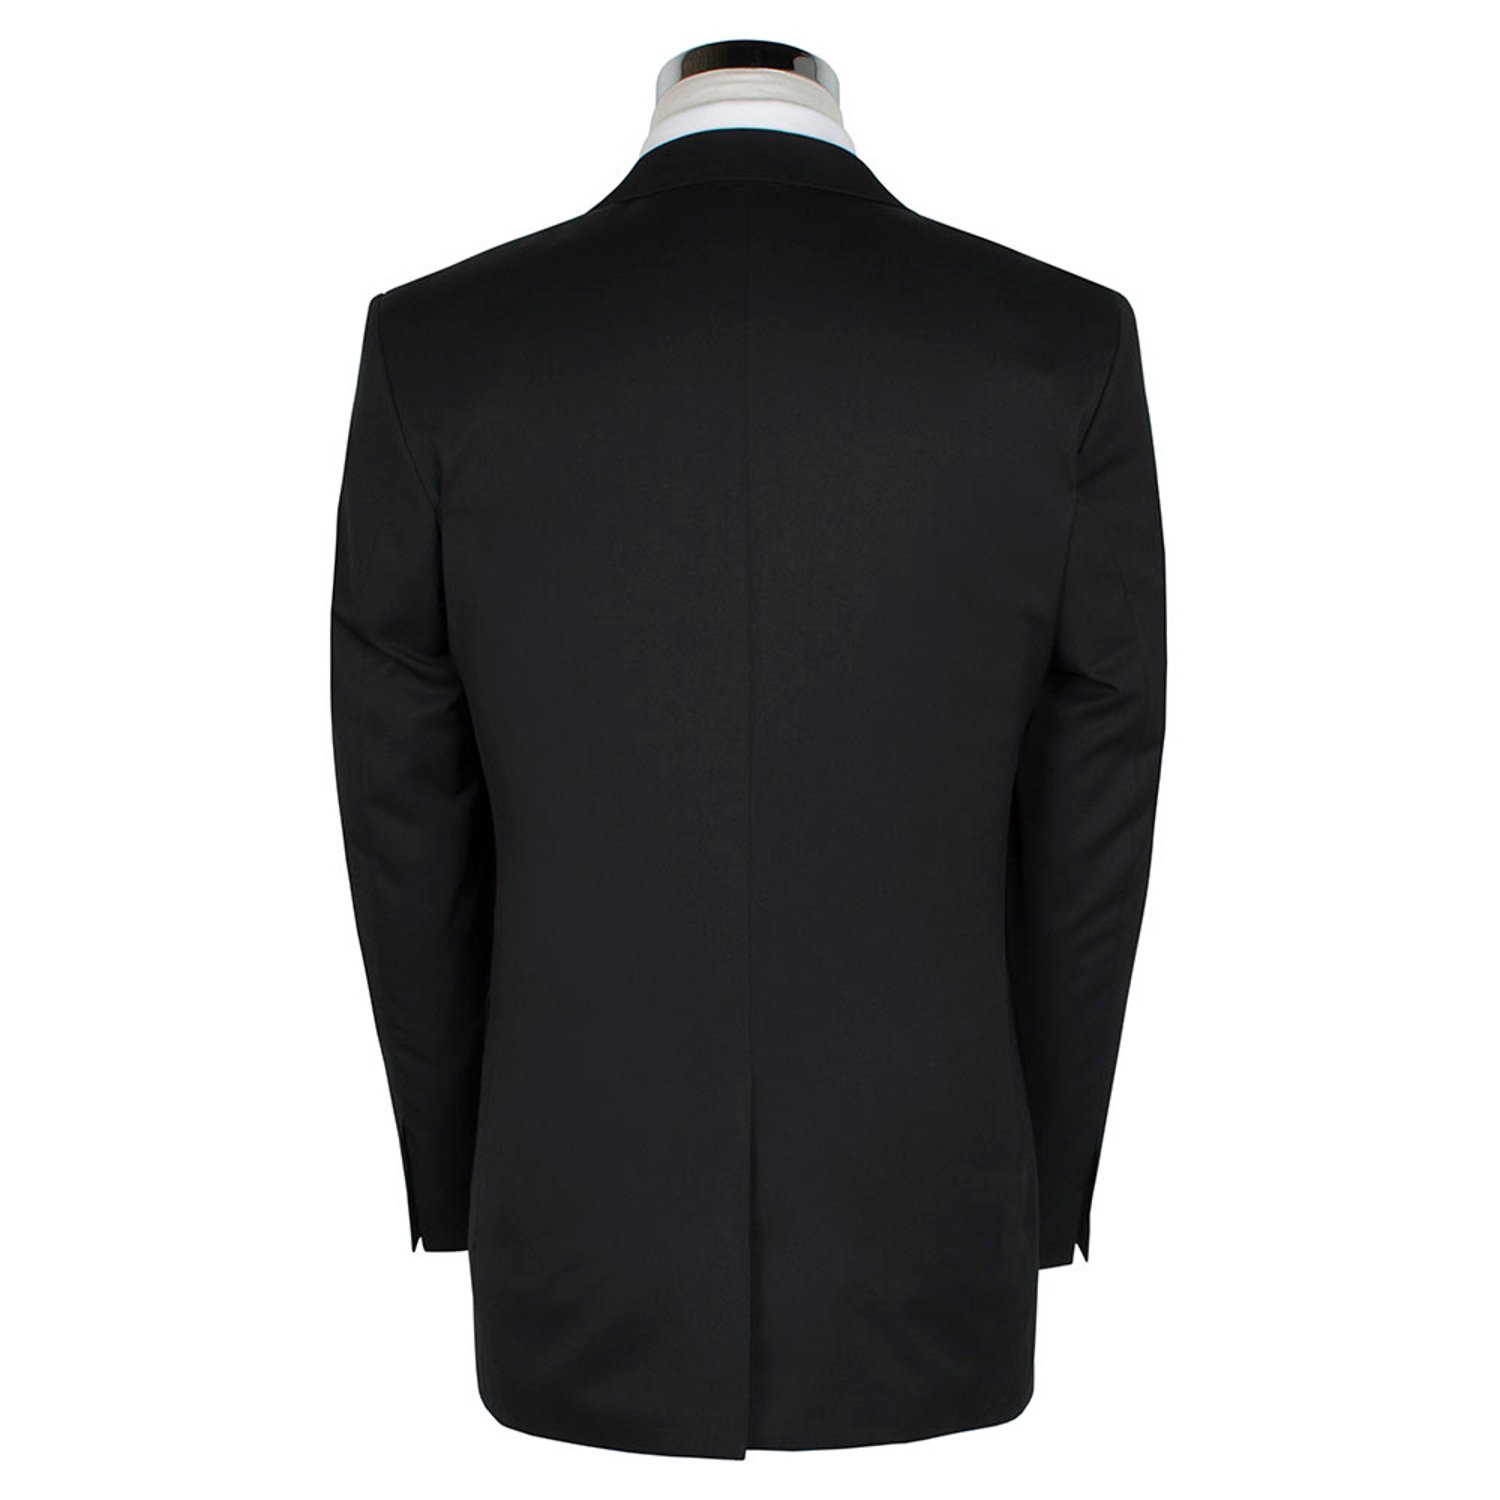 Contemporary Fit Black 3 Piece Suit - Tom Murphy's Formal and Menswear